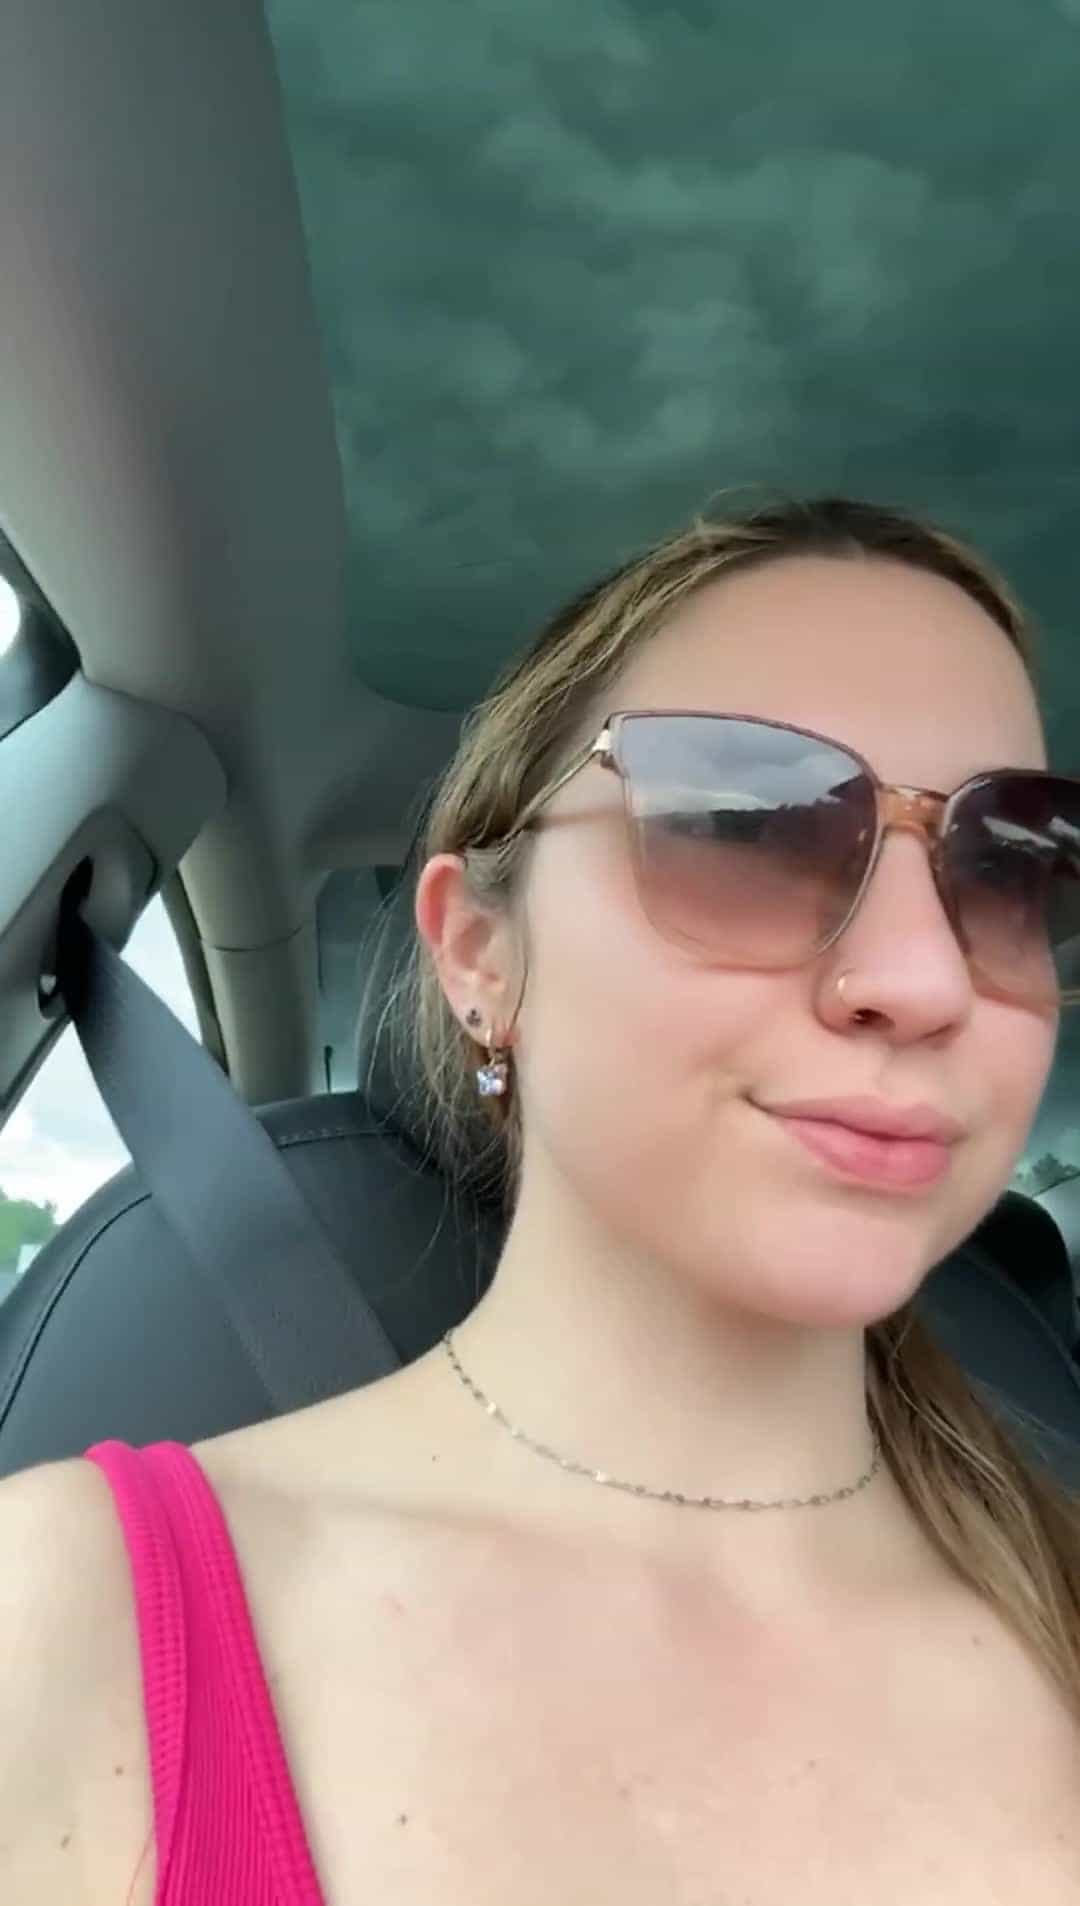 Driving around, showing off my big boobies